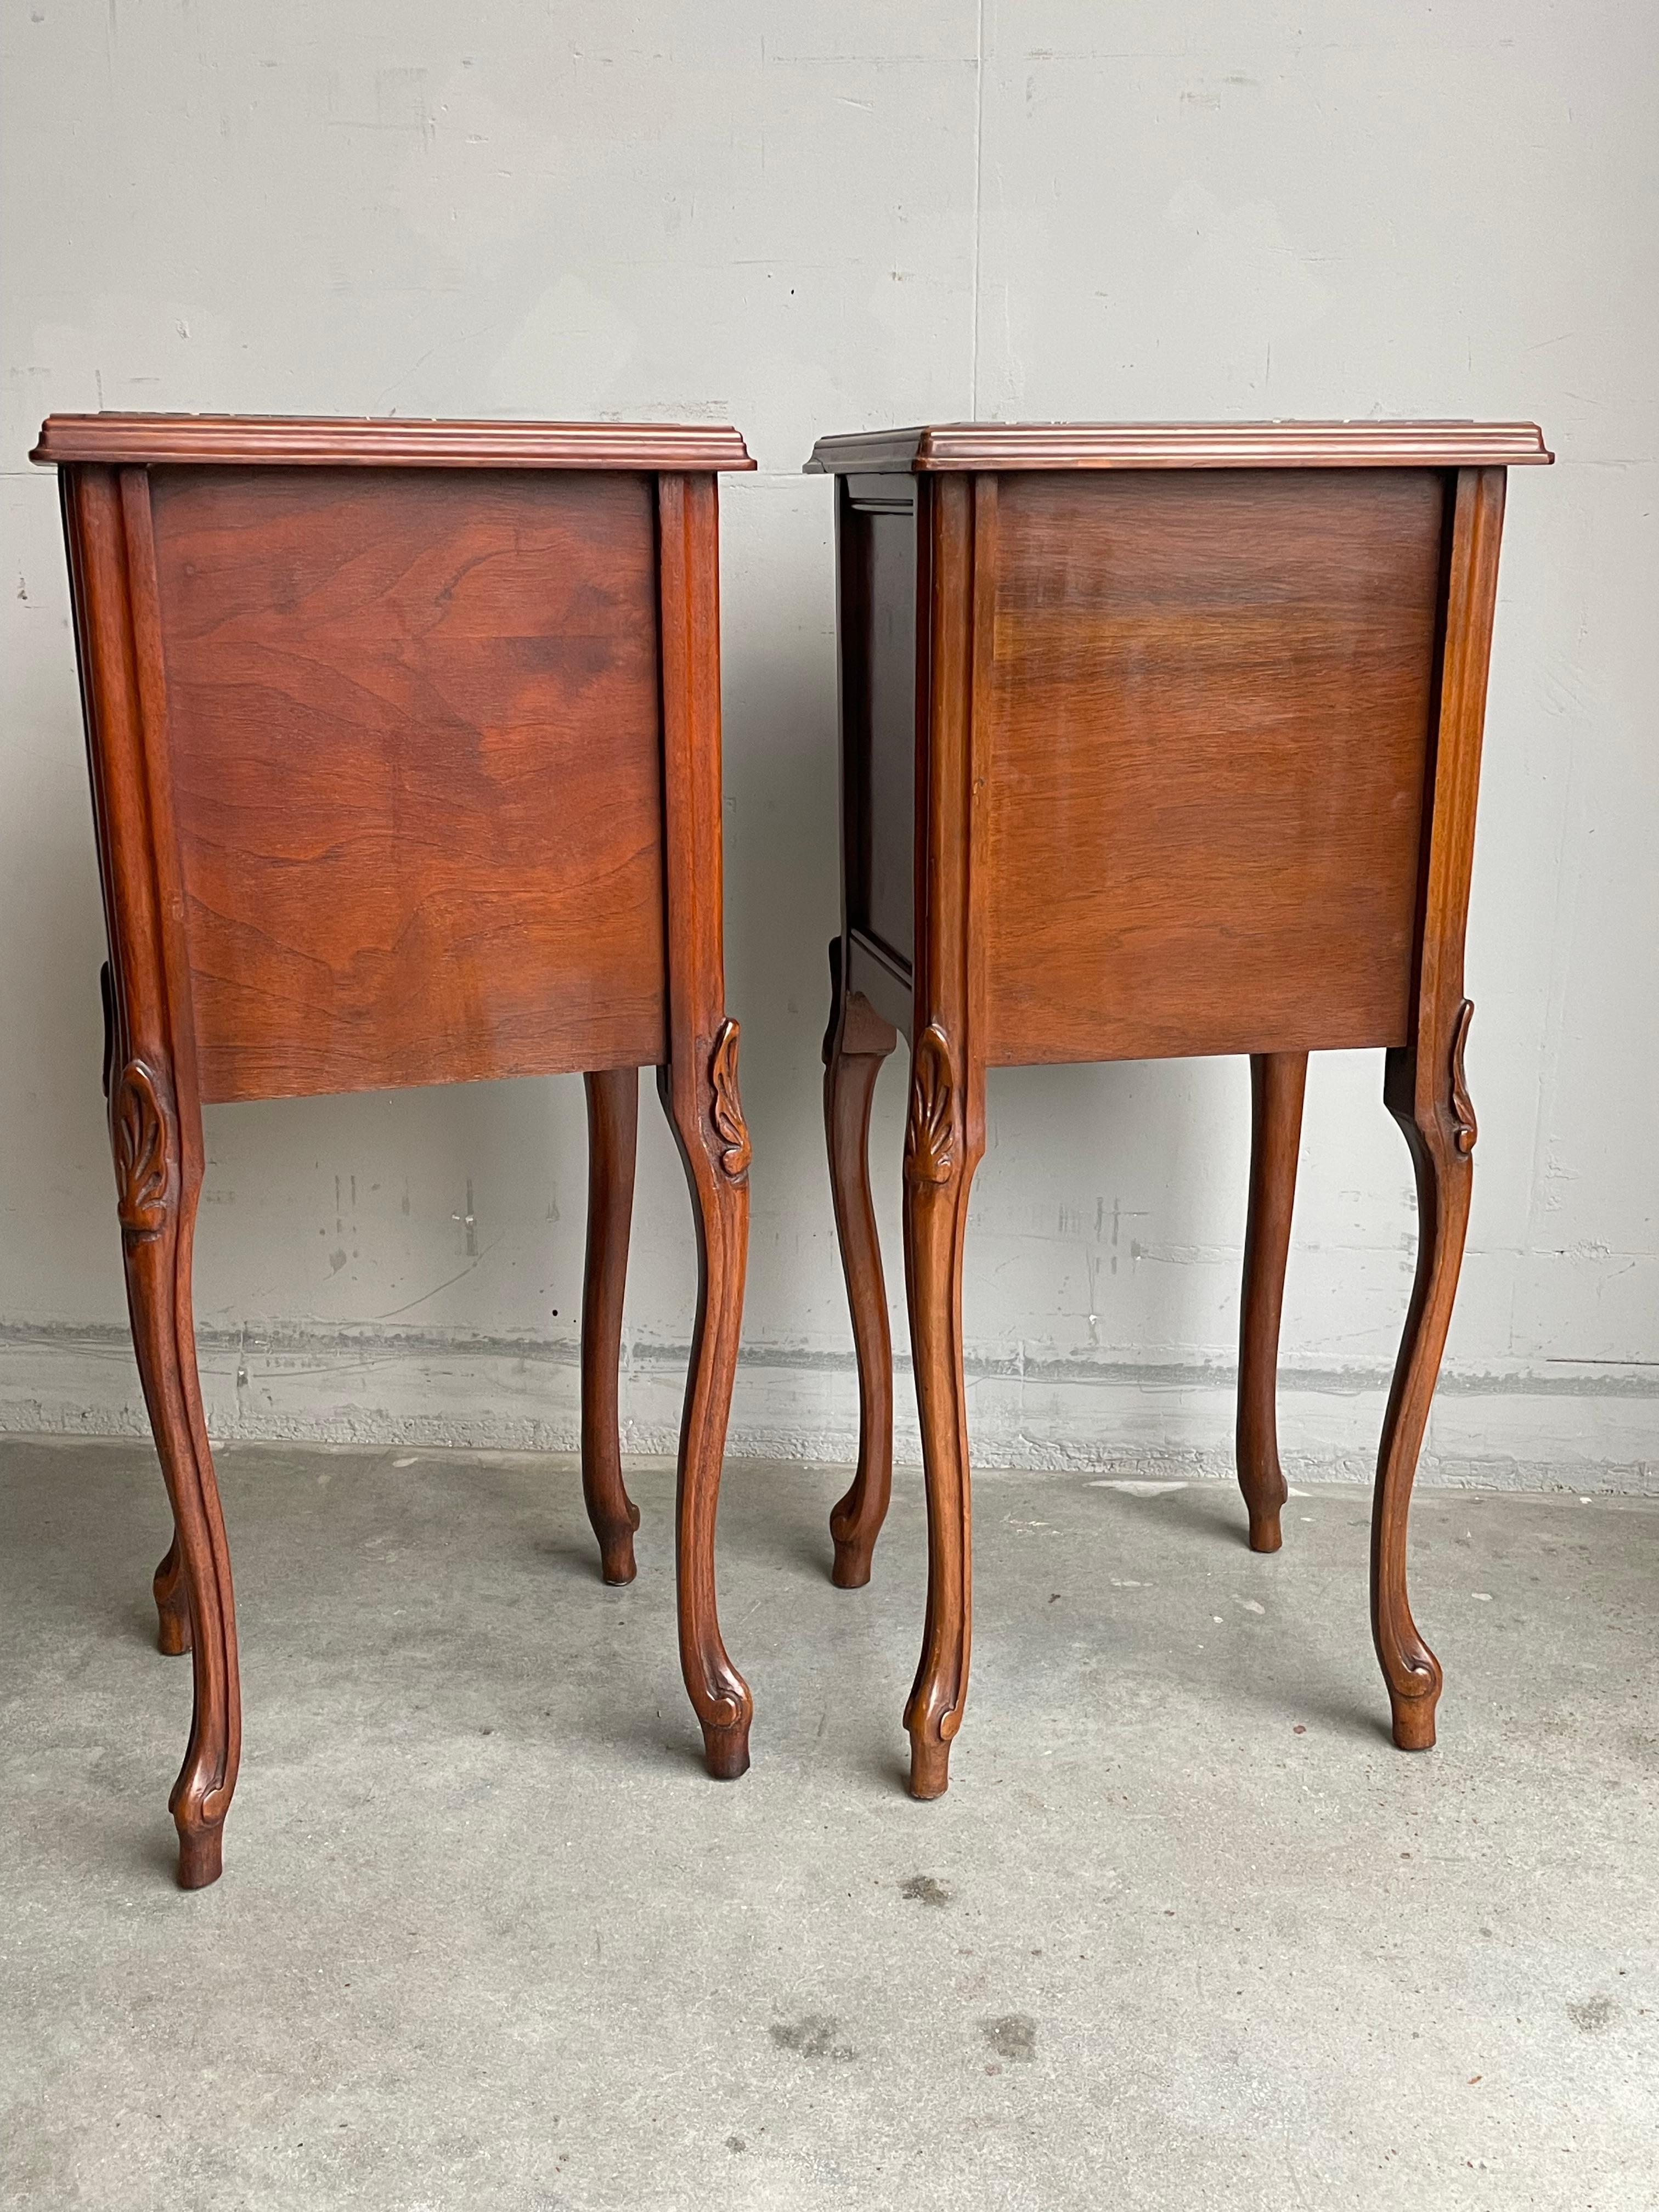 Antique Pair of Nutwood Bedside Cabinets / Nightstands with Stunning Marble Tops For Sale 3